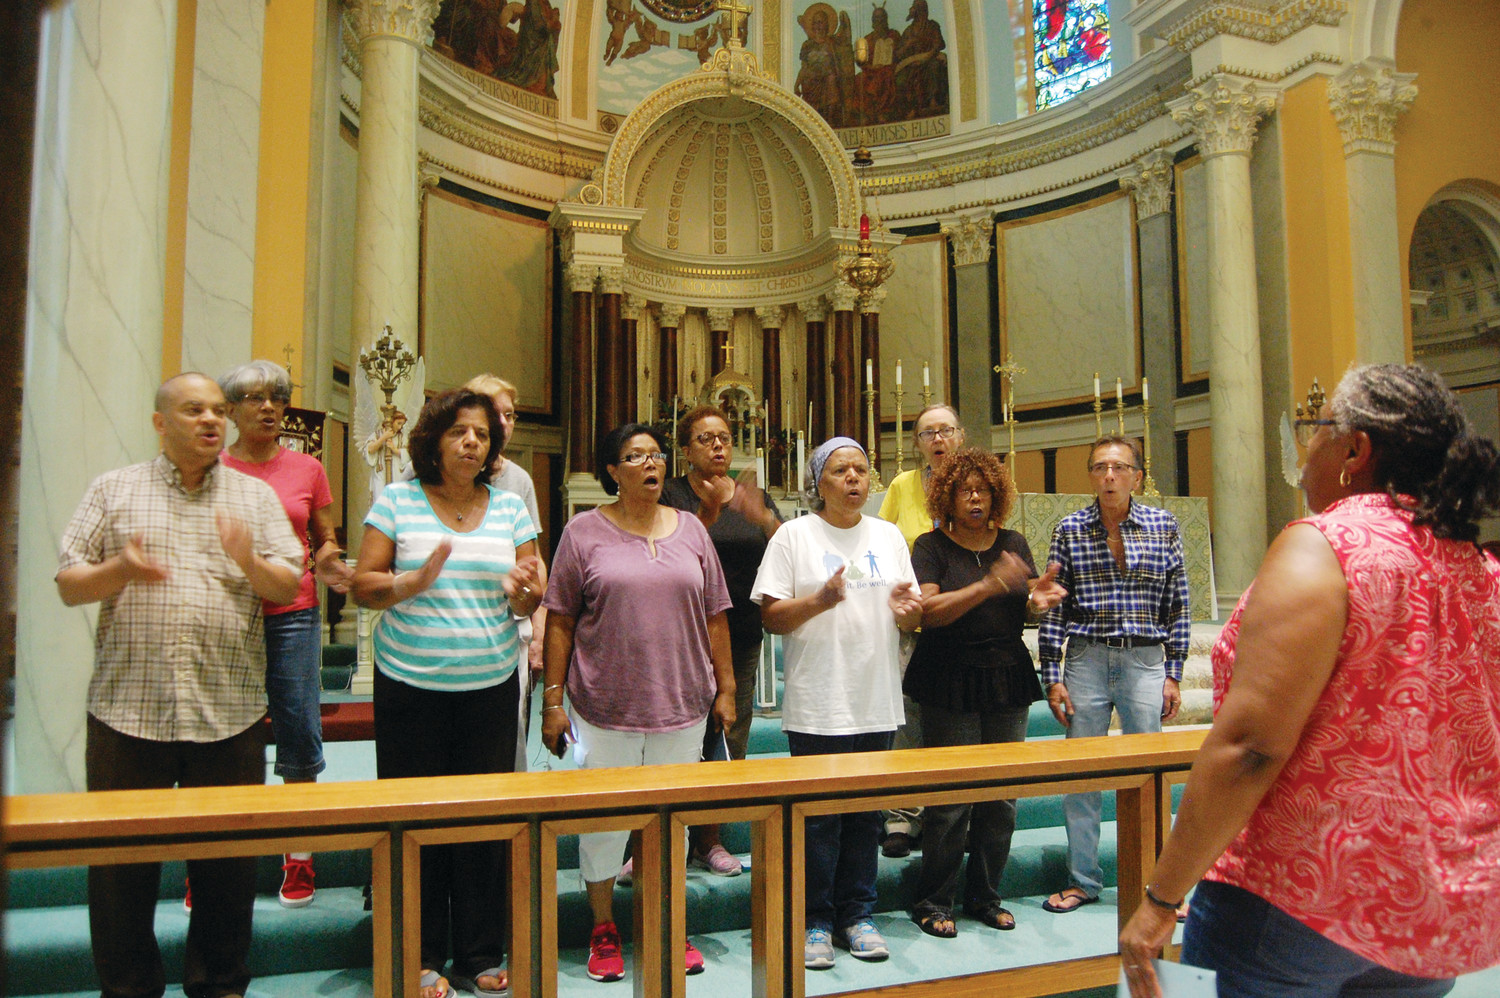 Members of the Holy Name of Jesus Gospel Choir, along with some of their brethren from the Providence parish’s two other choirs — the African Community Choir and the St. Ambrose Schola Cantorum — rehearse for their concert on Sunday, Sept. 9 at Holy Name of Jesus Church.